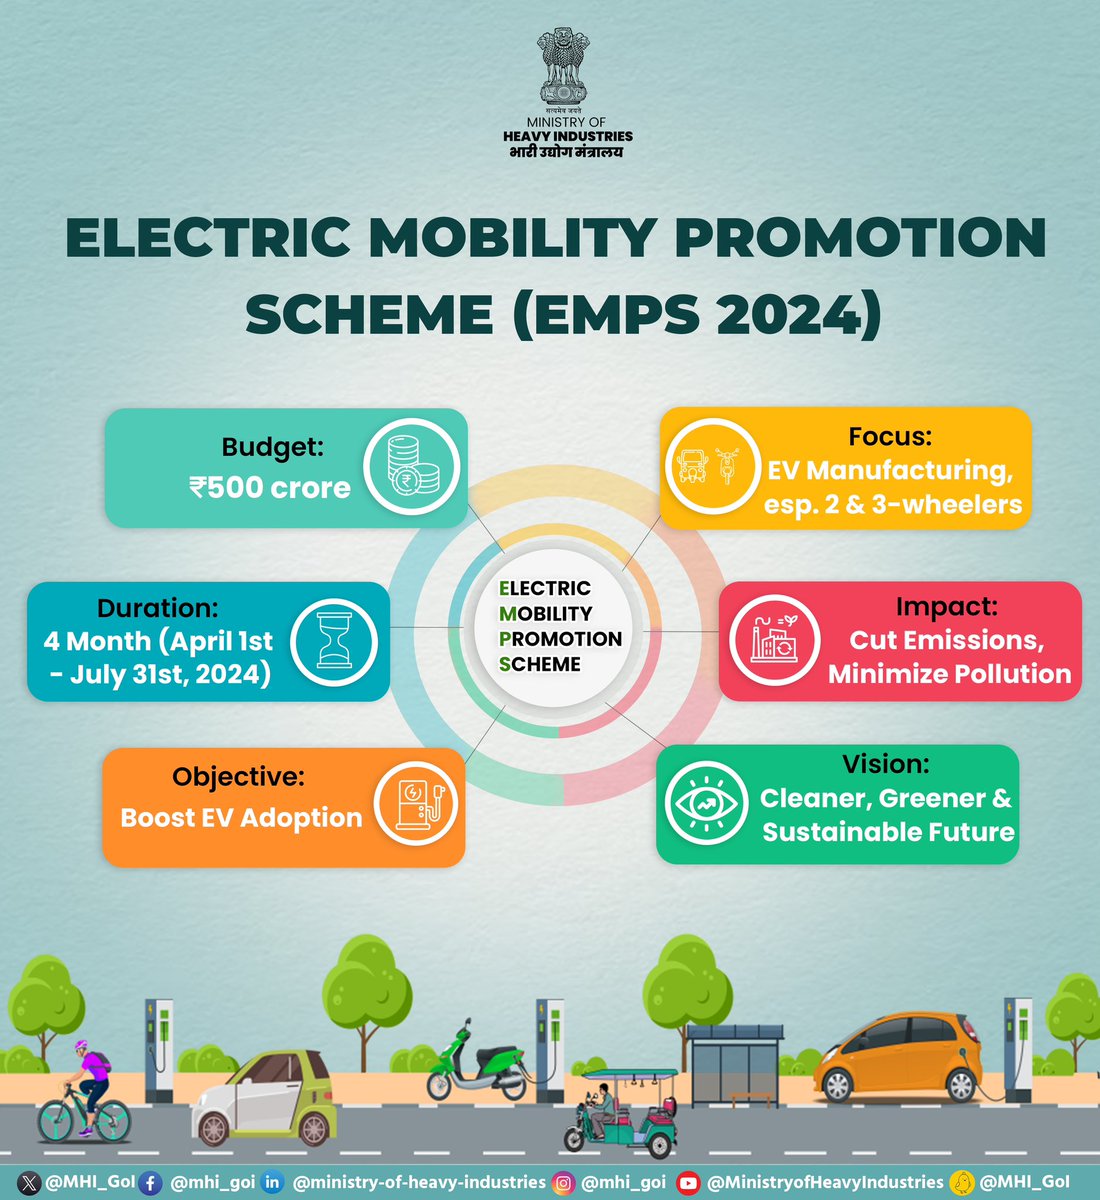 MHI rolls out the Electric Mobility Promotion Scheme 2024, dedicating INR 500 crore from April 1st to July 31st, 2024, to accelerate nationwide adoption of electric vehicles, particularly e-2W and e-3W. Let's journey towards a greener future!🌿 #ElectricMobility #EMPS2024